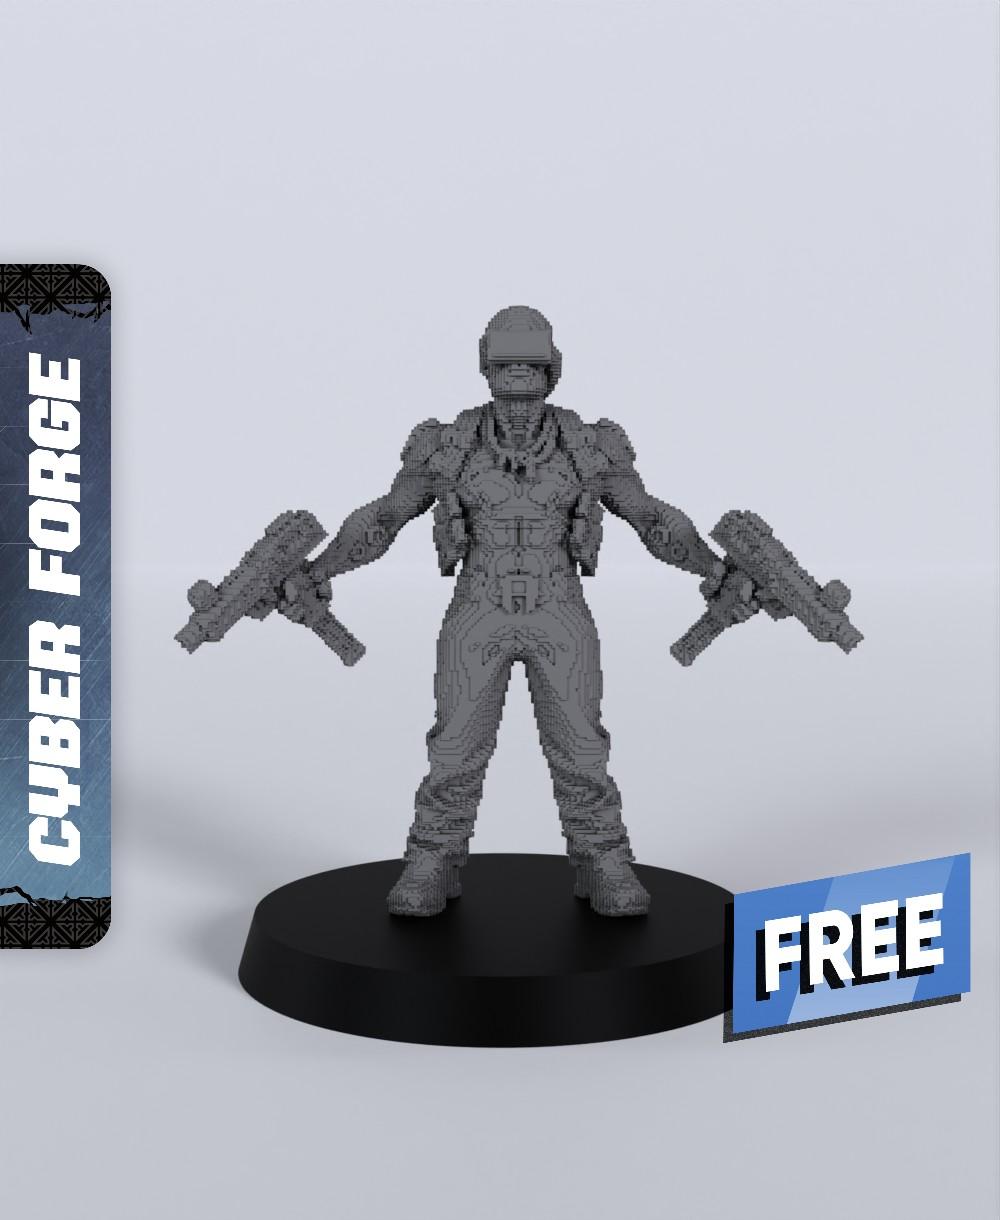 Cube in Cyberspace - With Free Cyberpunk Warhammer - 40k Sci-Fi Gift Ideas for RPG and Wargamers 3d model